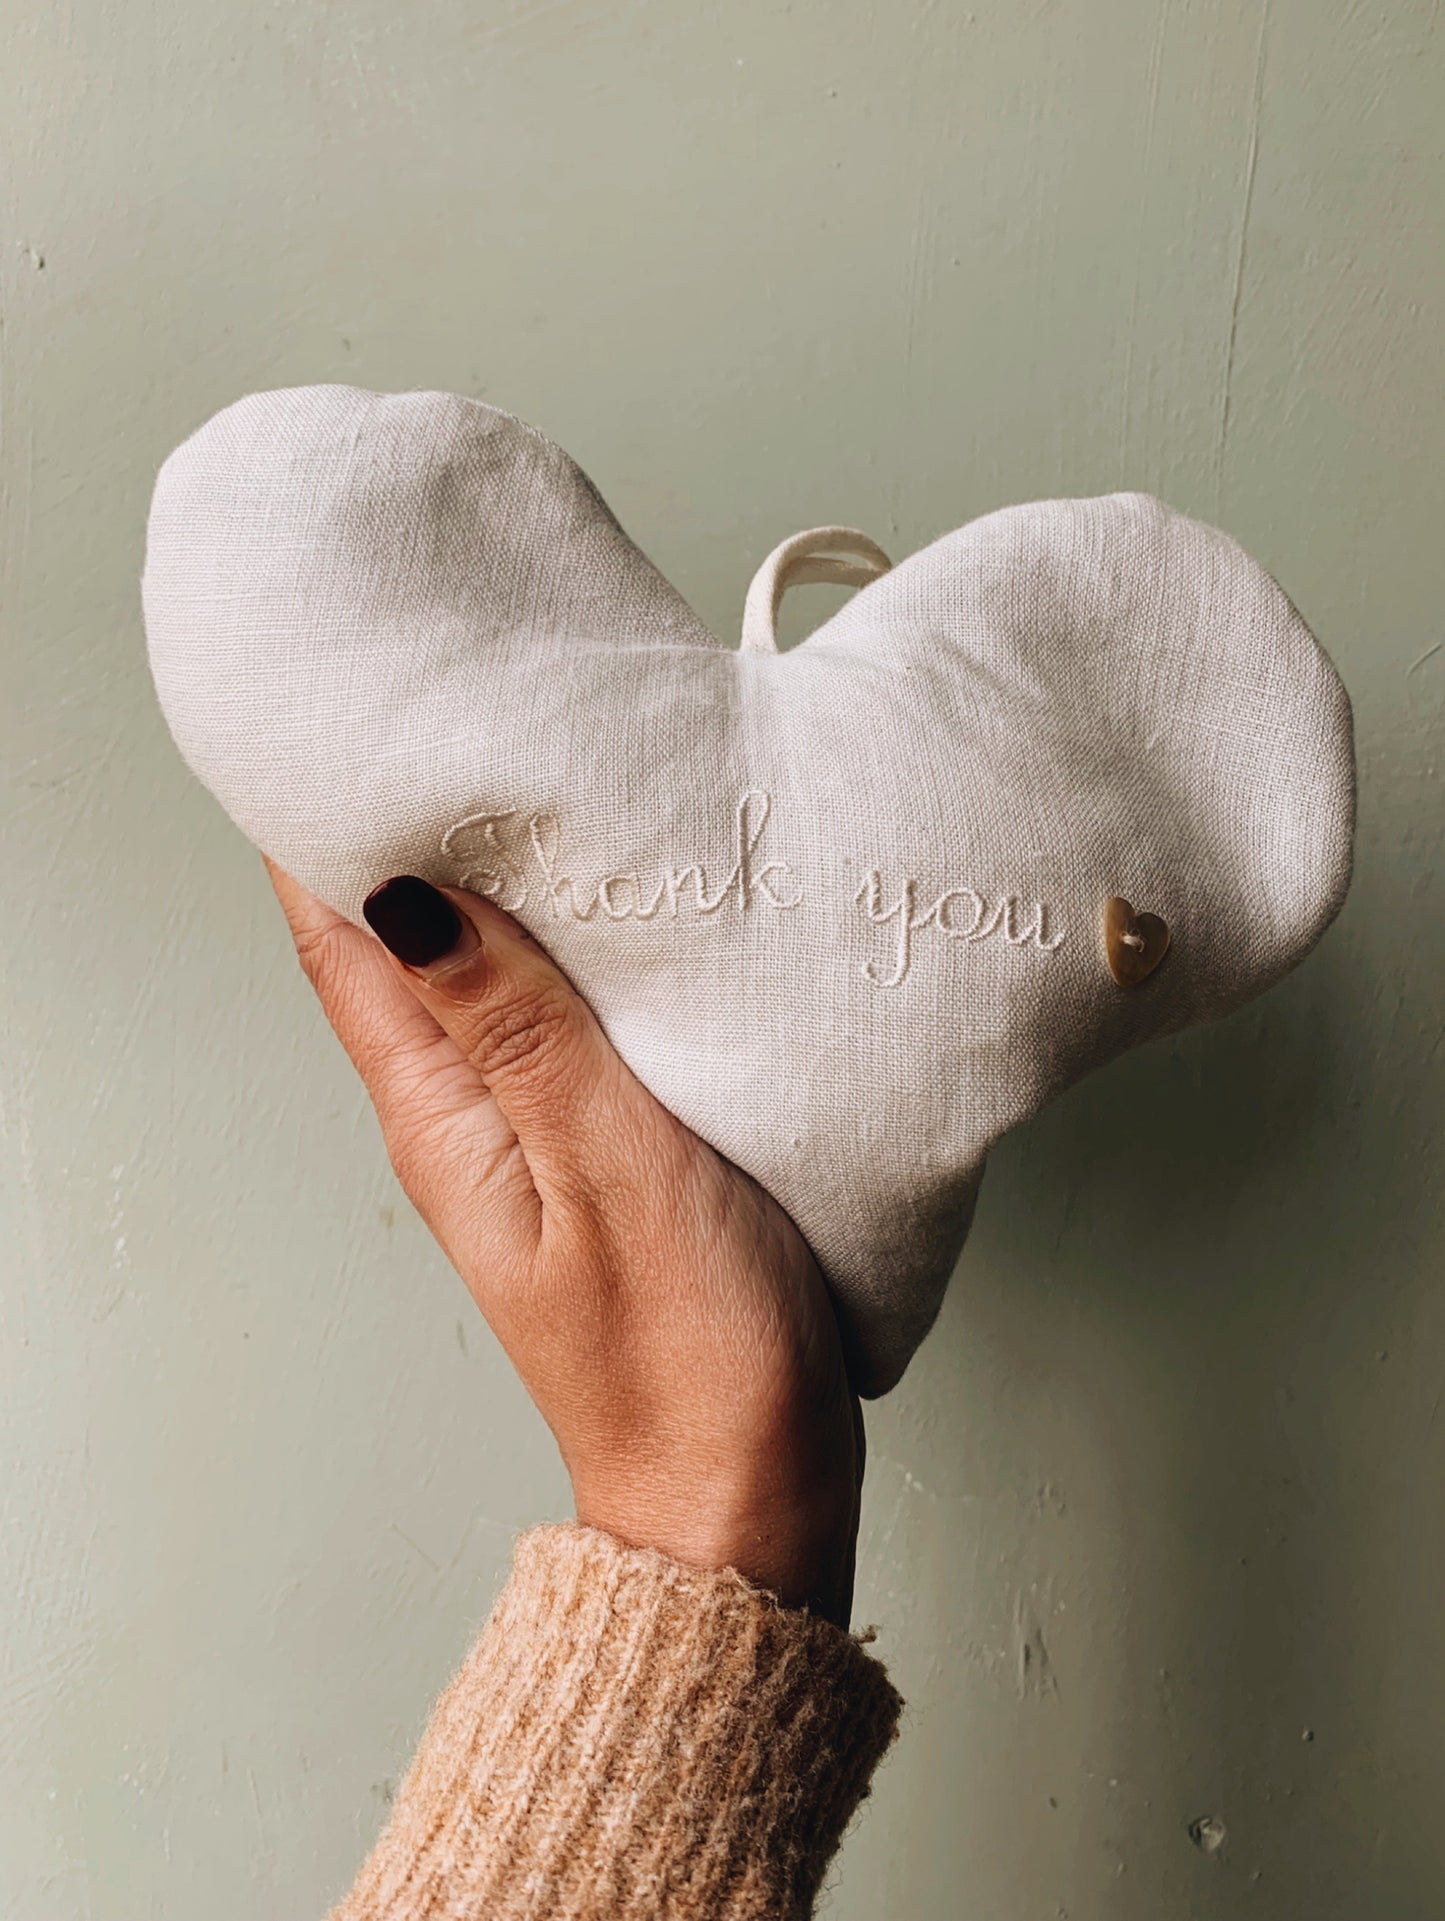 “Thank You” Fabric Heart Hanging